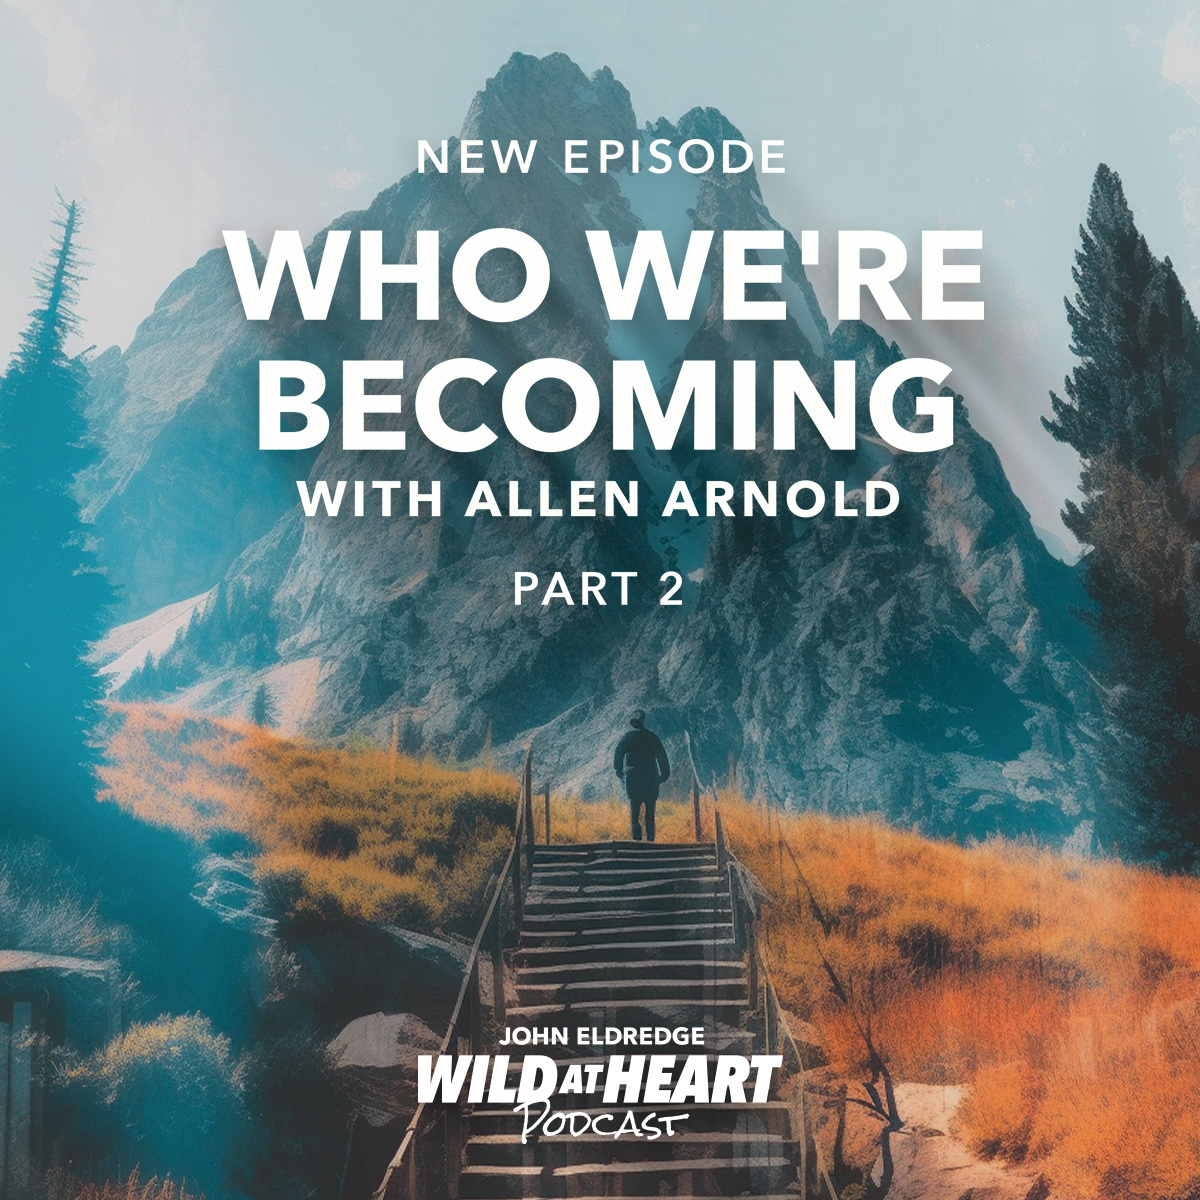 Our lives can change dramatically over the course of a decade. In this second episode, Allen shares his journey from drivenness to presence with Morgan and Craig. bit.ly/becomingpt2